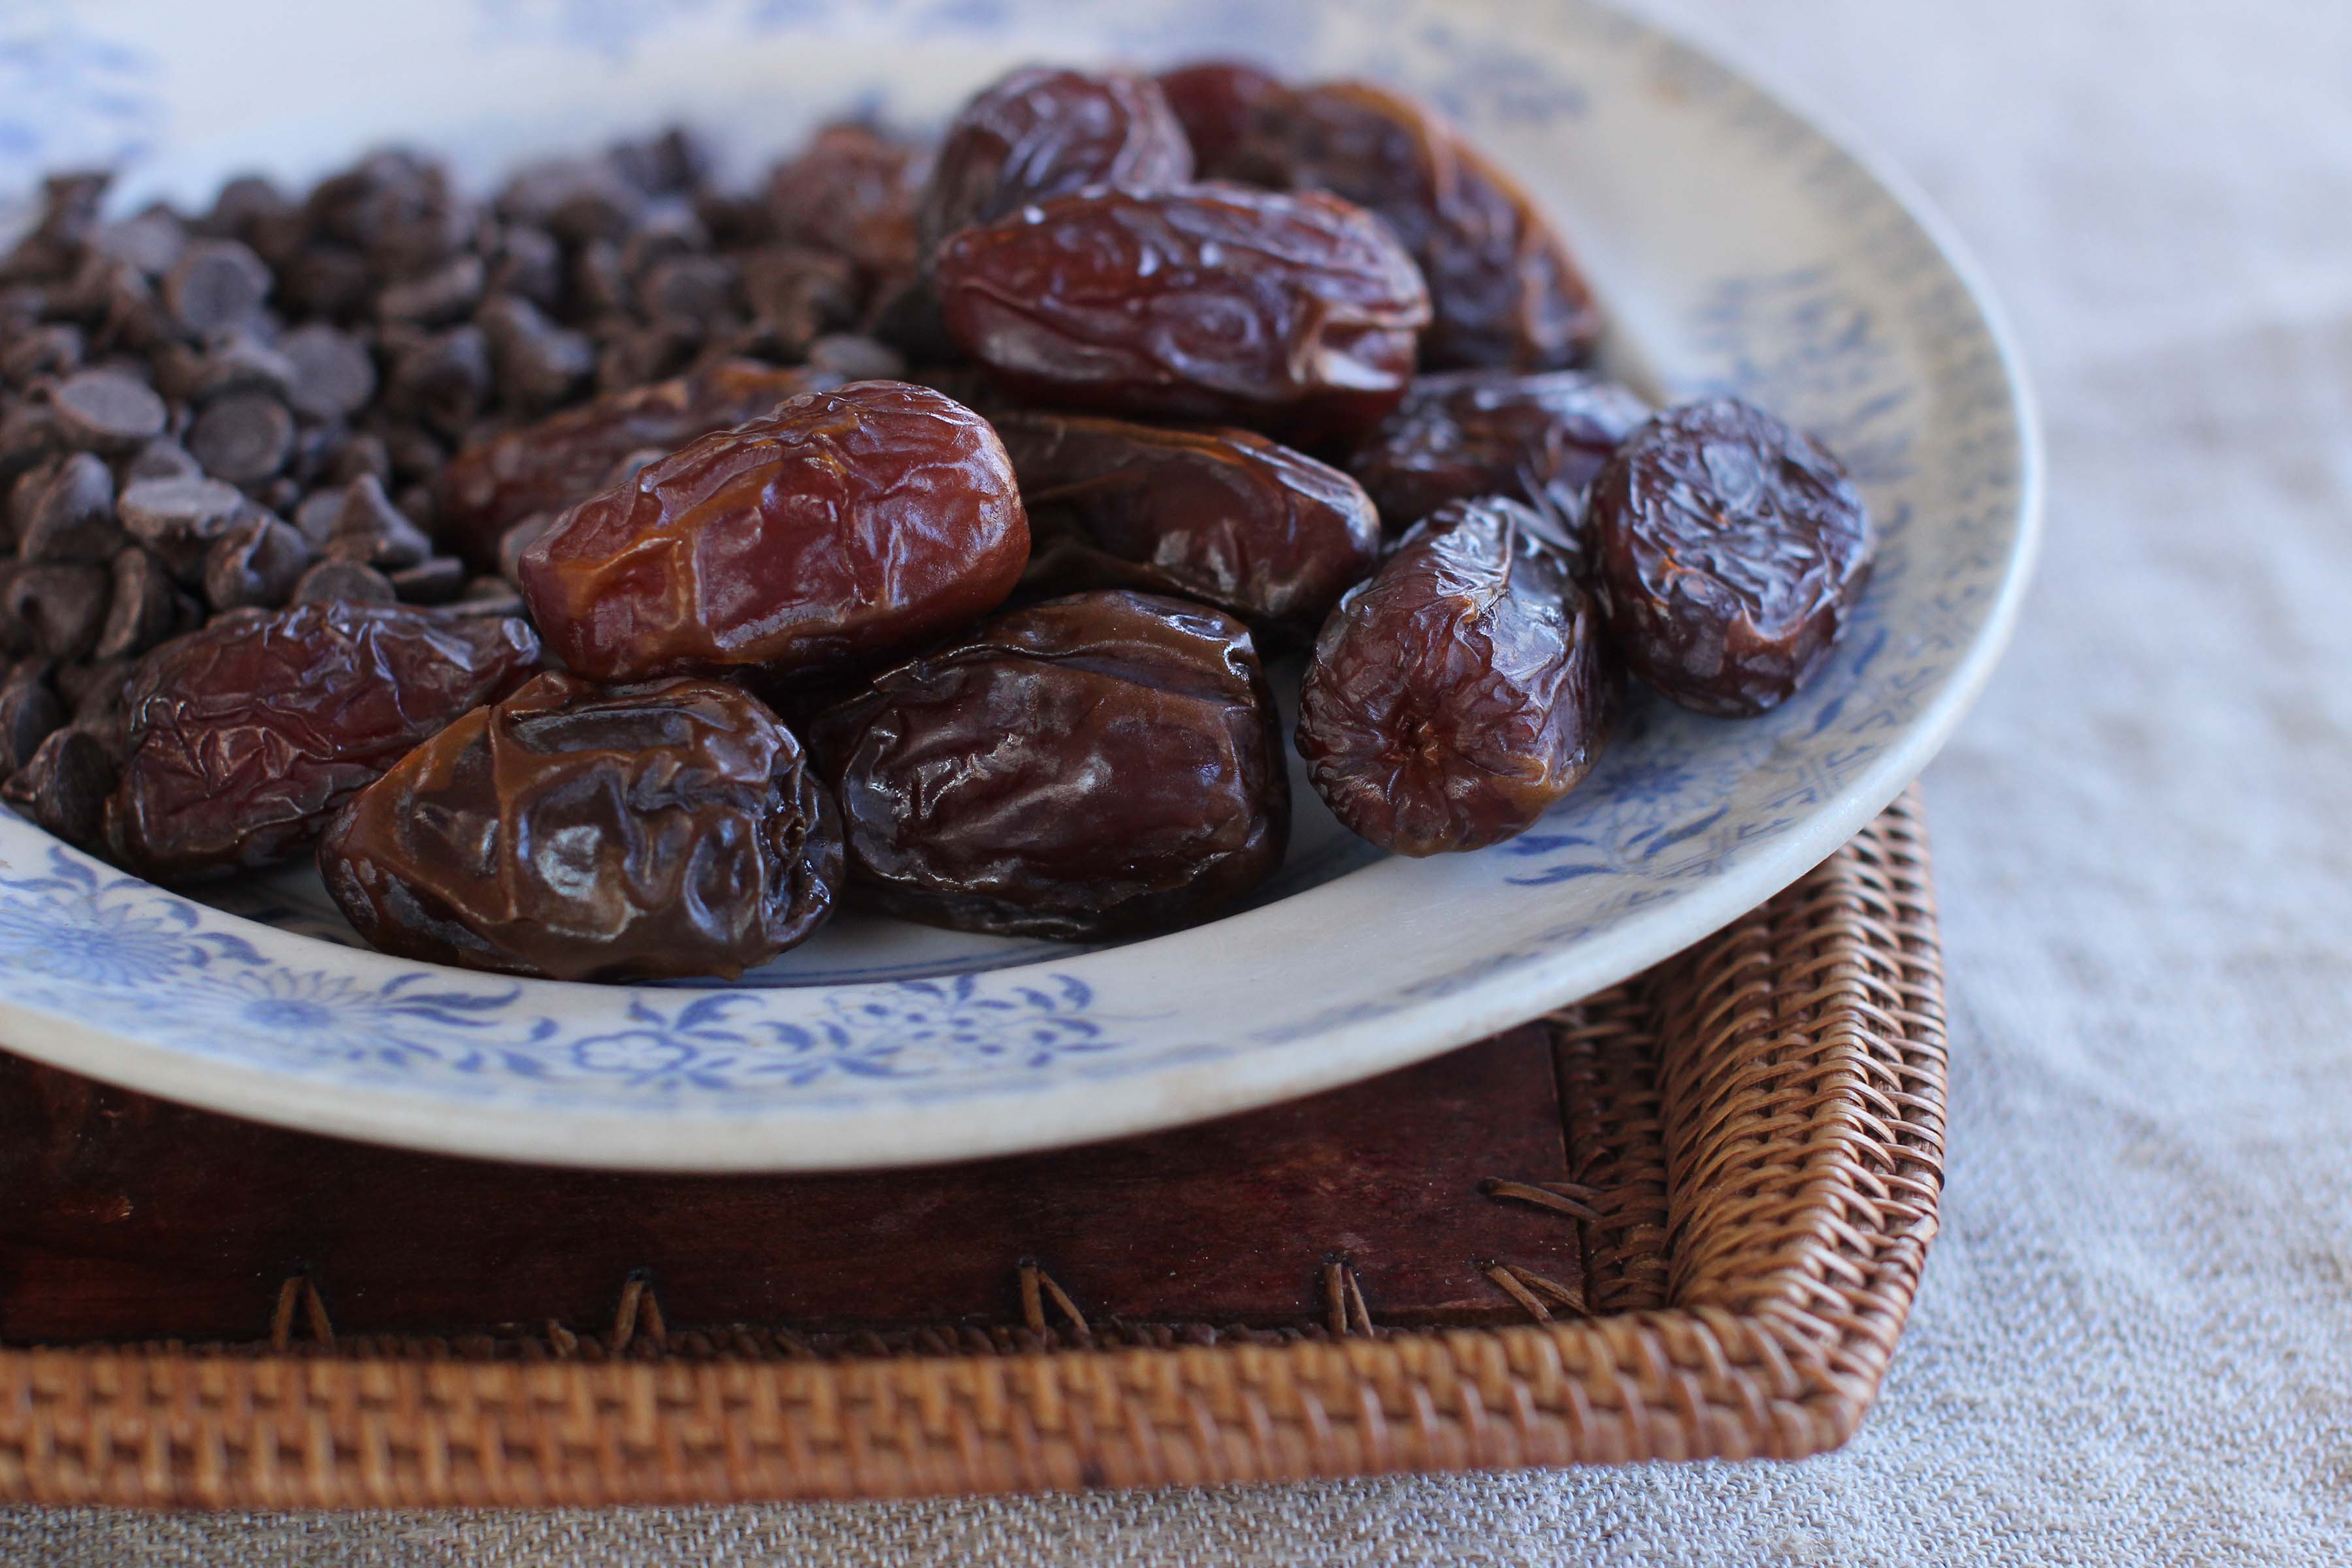 From the Middle East to the mid-Atlantic, dates make a comeback in D.C.